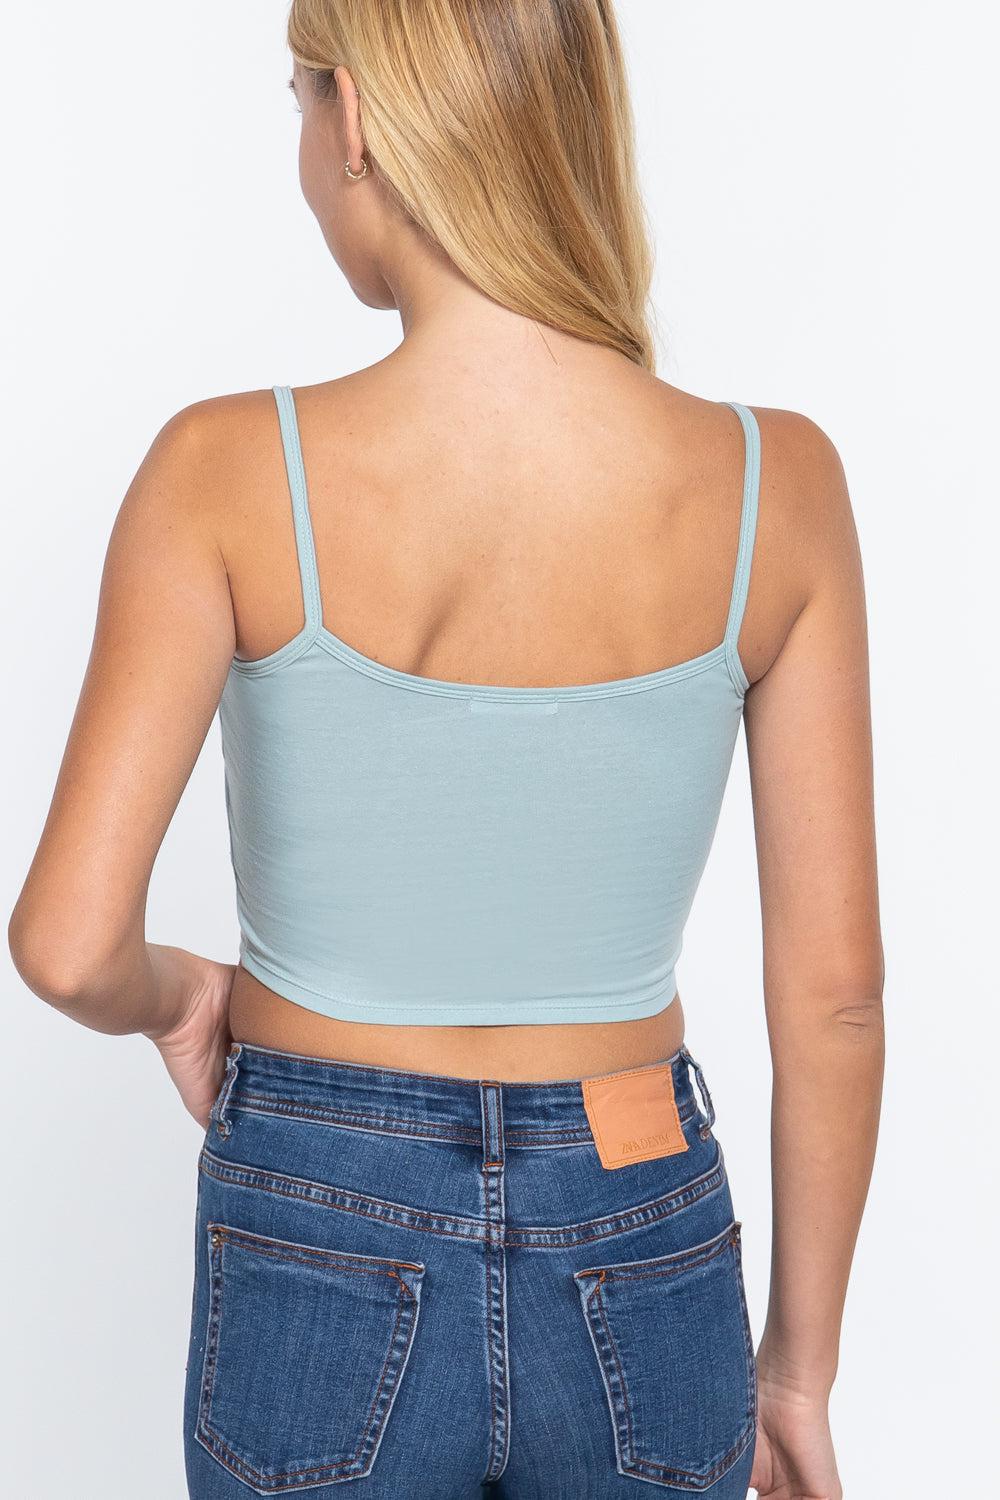 Round Neck with removable Bra Cup Cotton Spandex Bra Top Blue Zone Planet